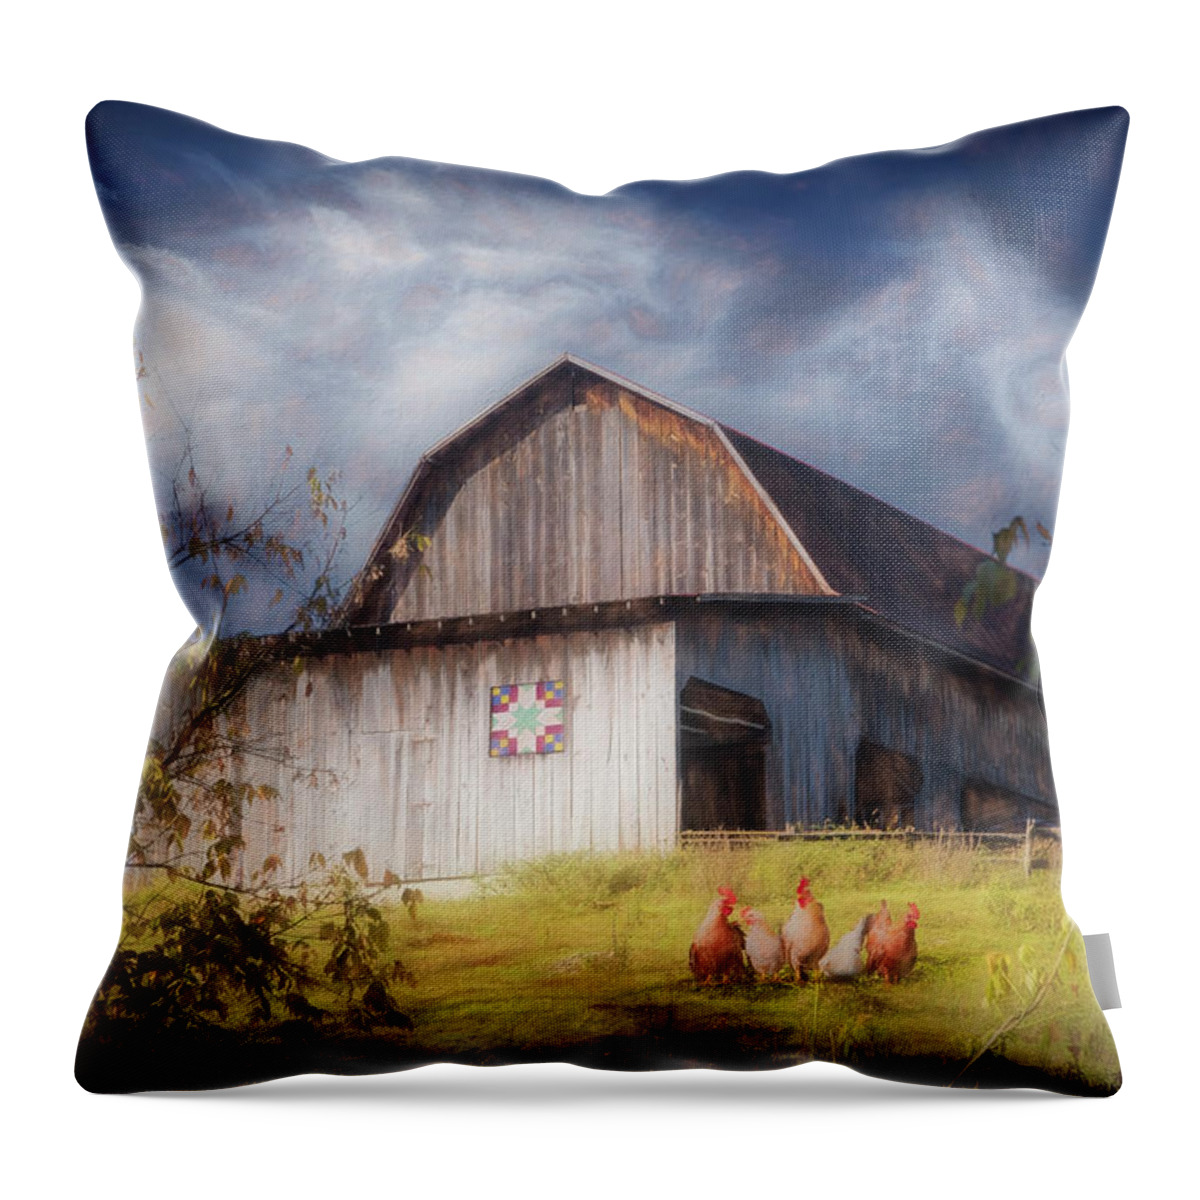 Chicken Throw Pillow featuring the photograph Chickens at the Farm Barn Painting by Debra and Dave Vanderlaan